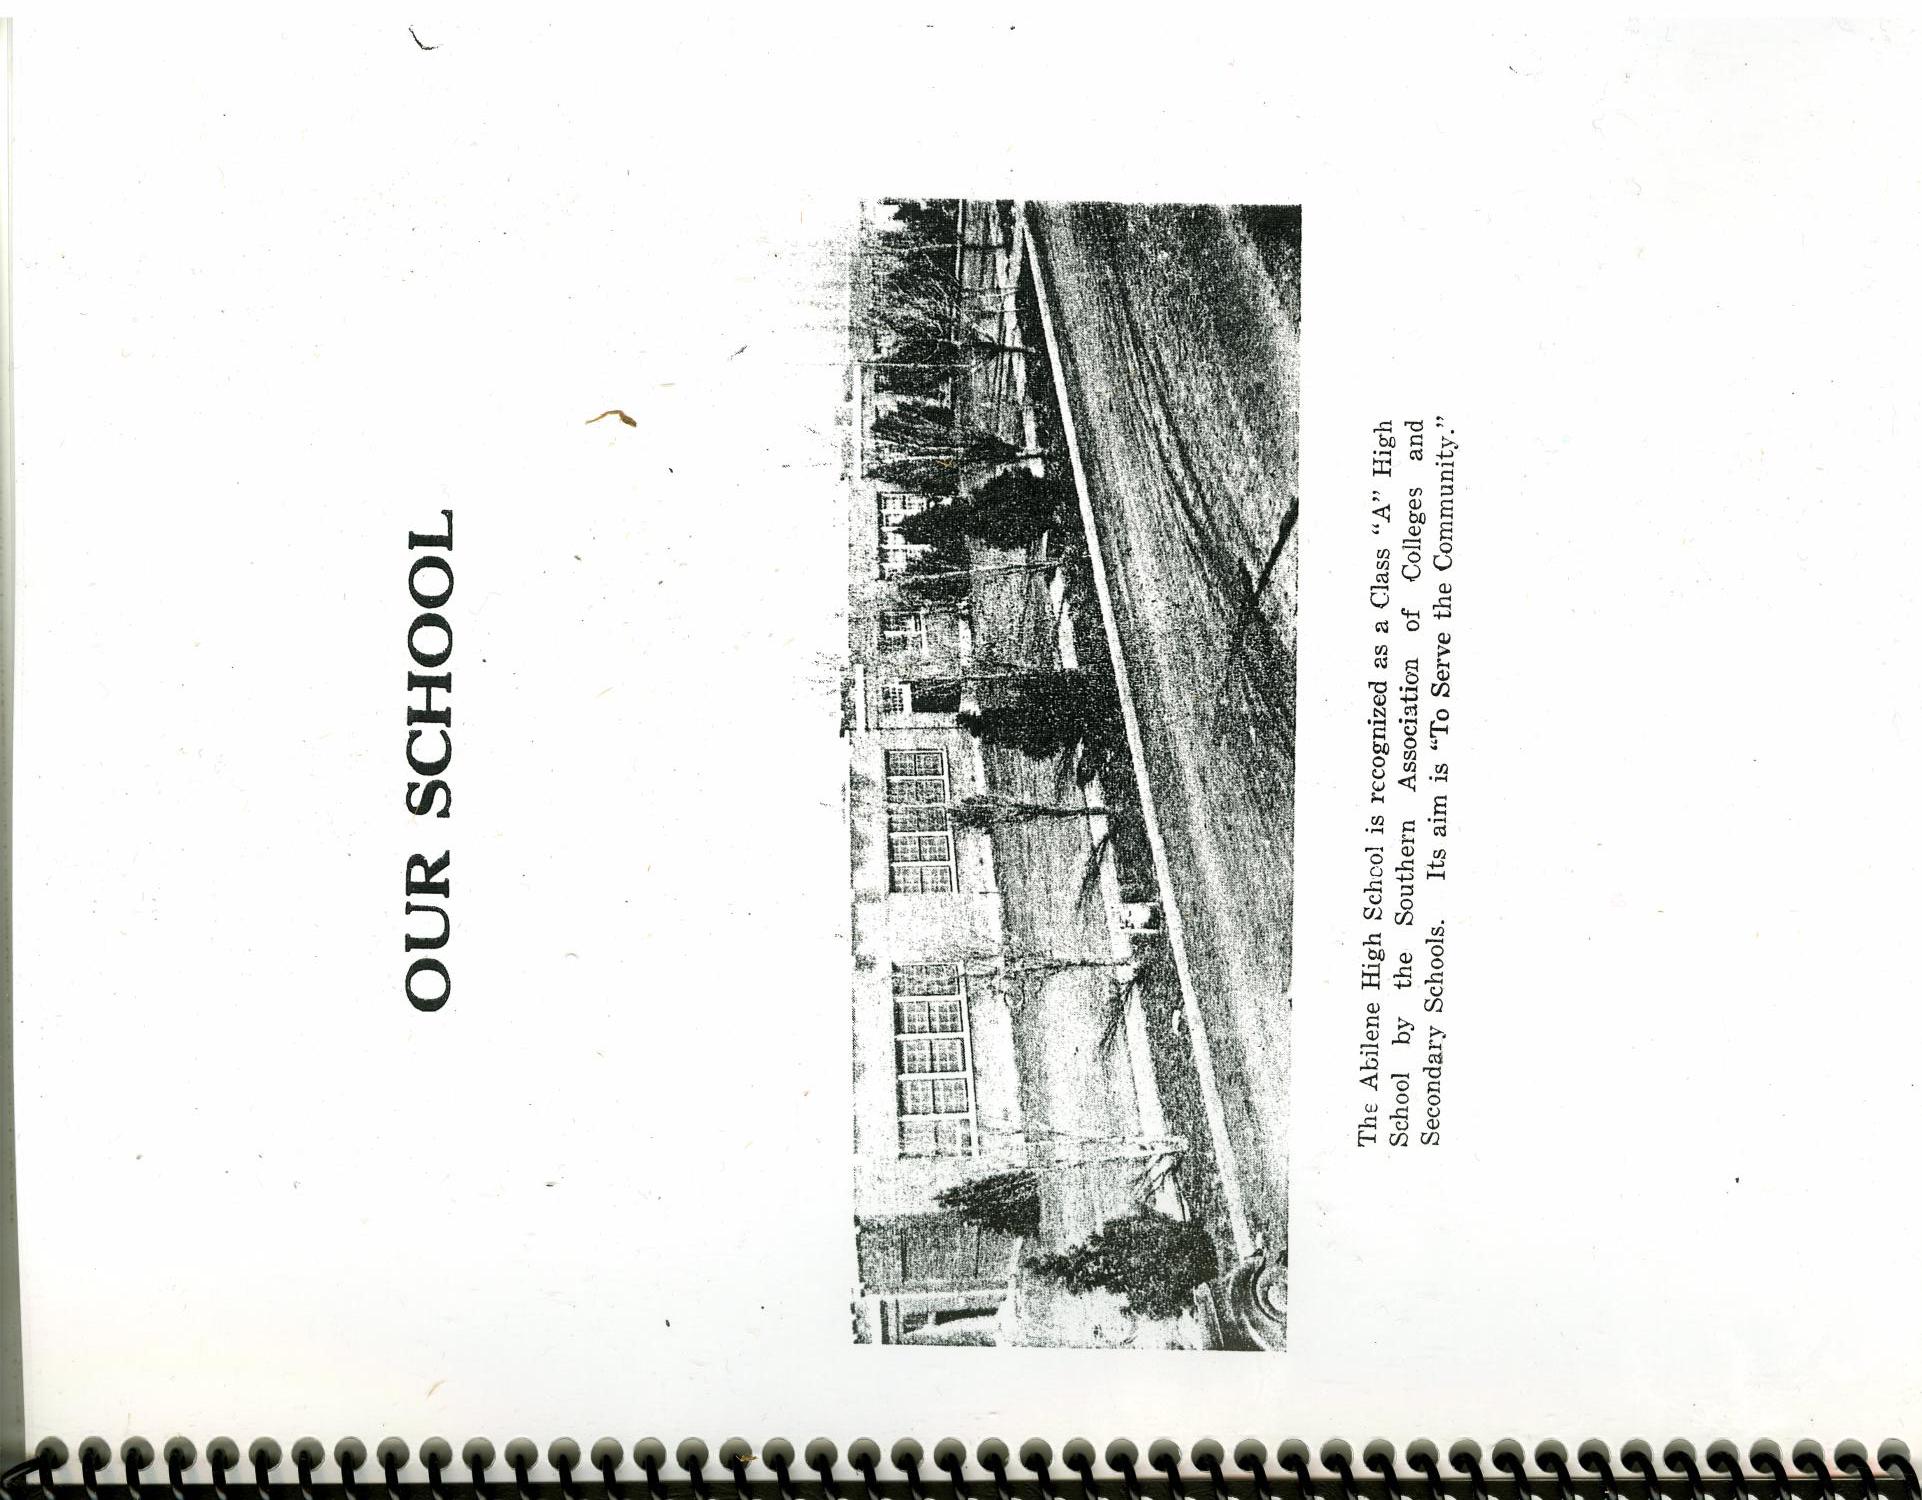 The Eagle, Yearbook of The Abilene High School, 1941
                                                
                                                    [Sequence #]: 1 of 62
                                                